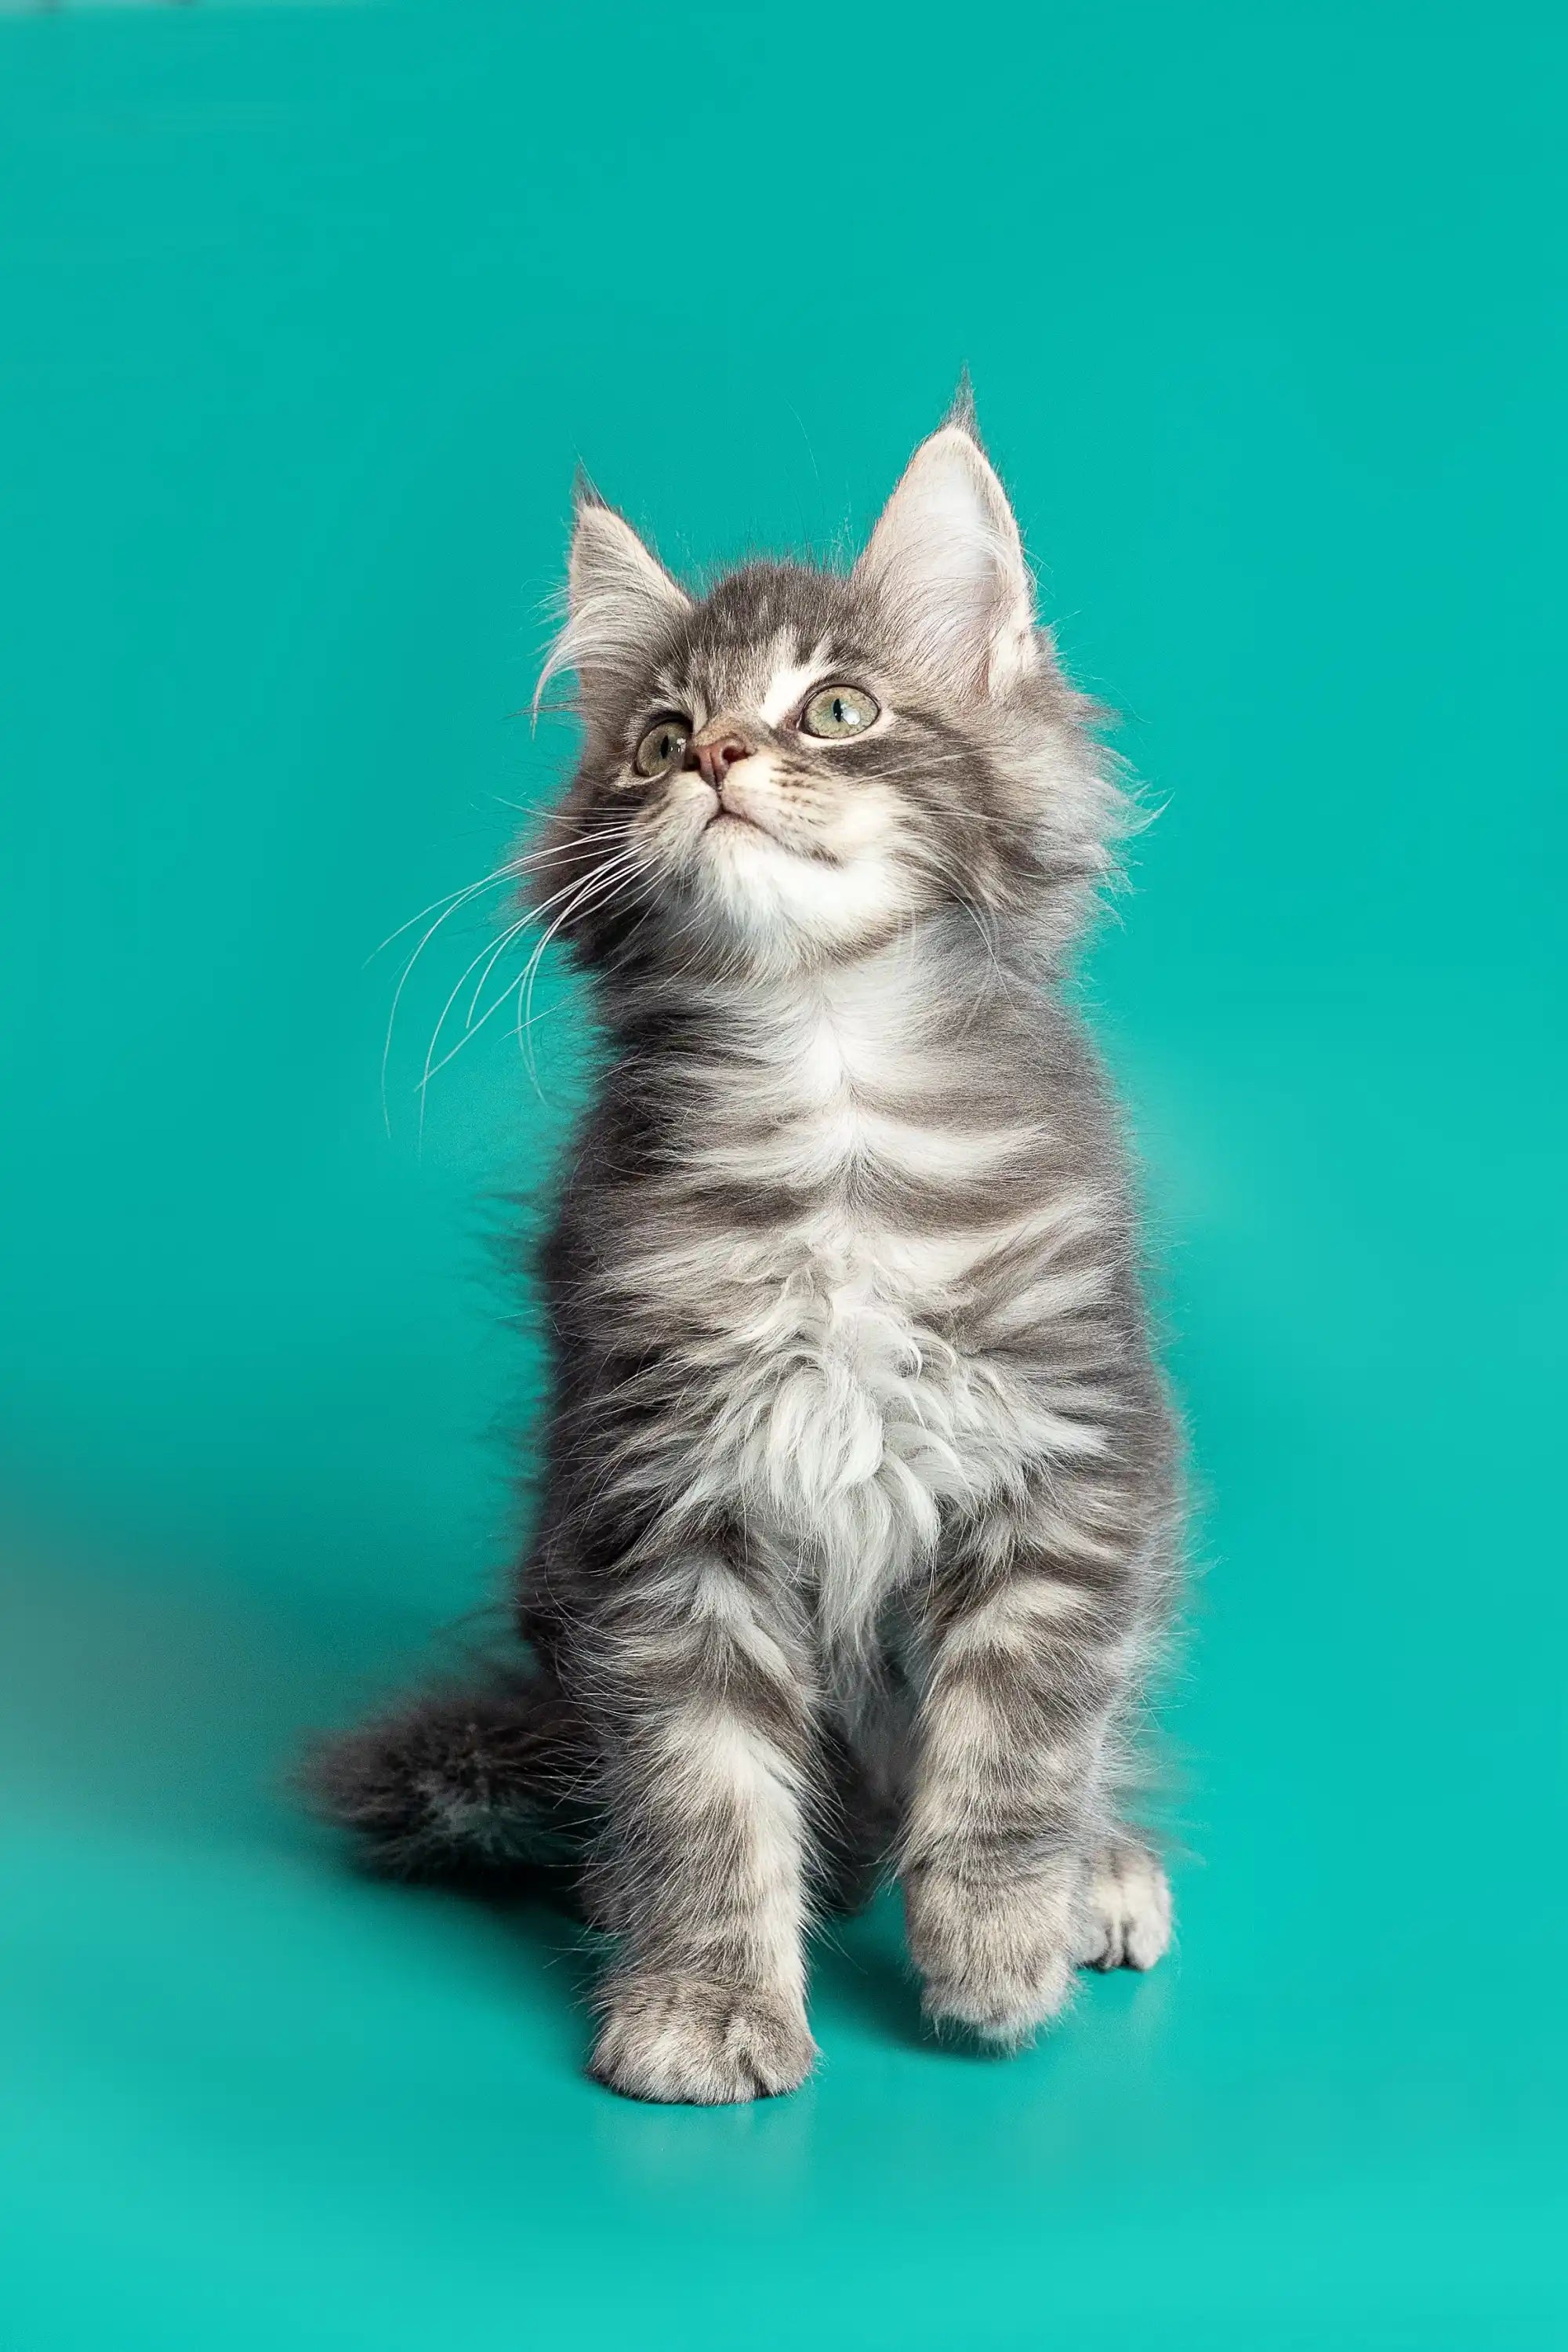 Maine Coon Kittens for Sale Ares | Kitten